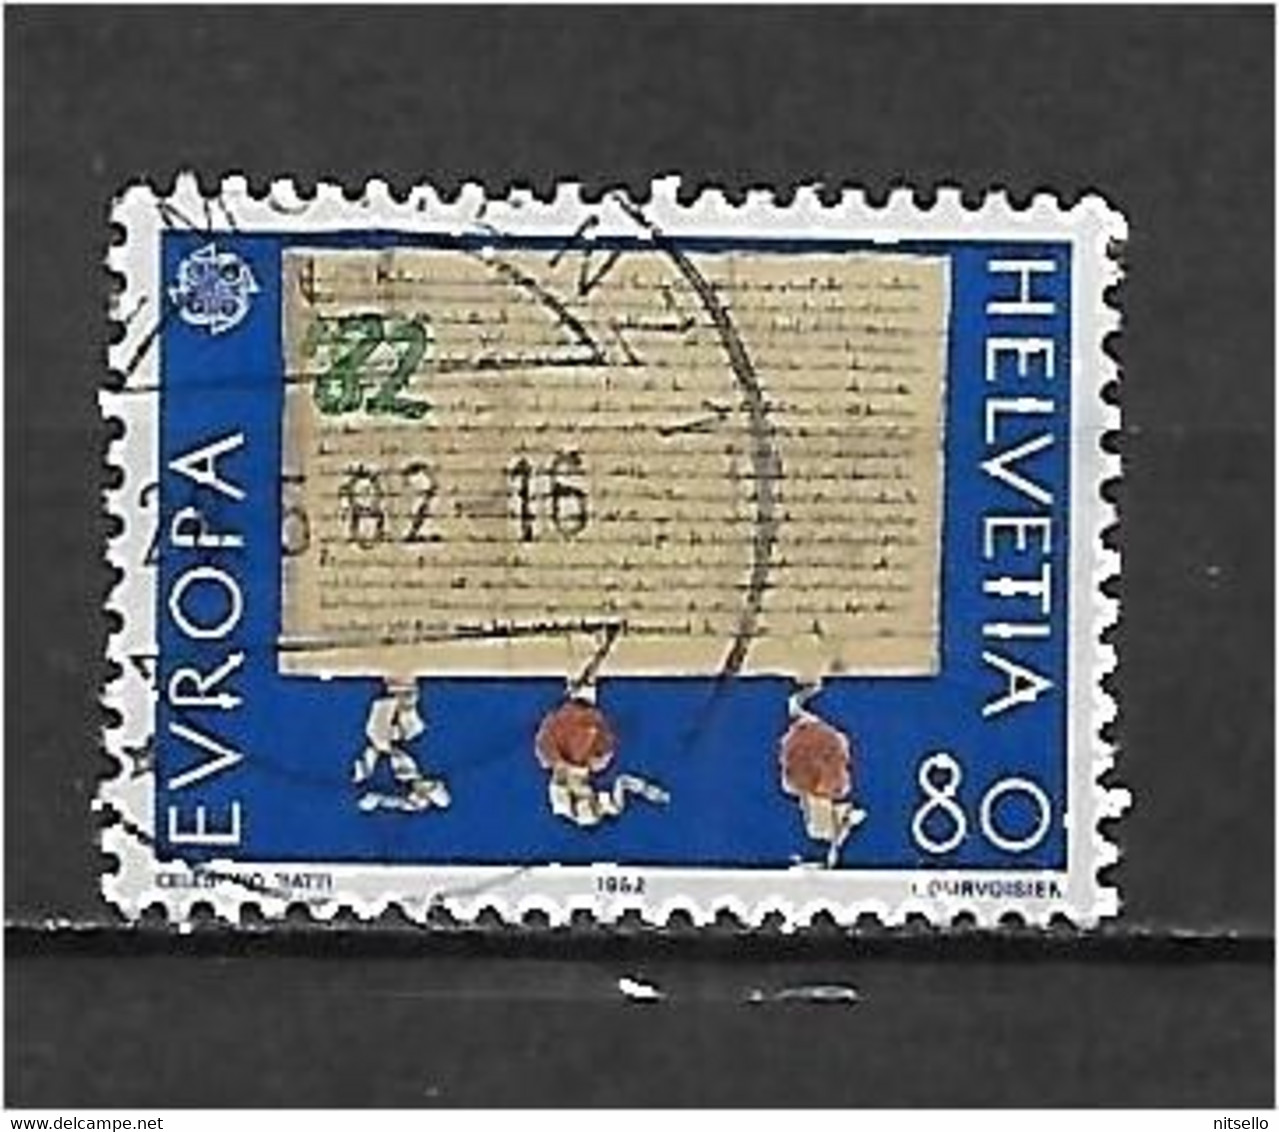 LOTE 1530A  ///  SUIZA   YVERT Nº:1116   ¡¡¡ OFERTA - LIQUIDATION - JE LIQUIDE !!! - Used Stamps